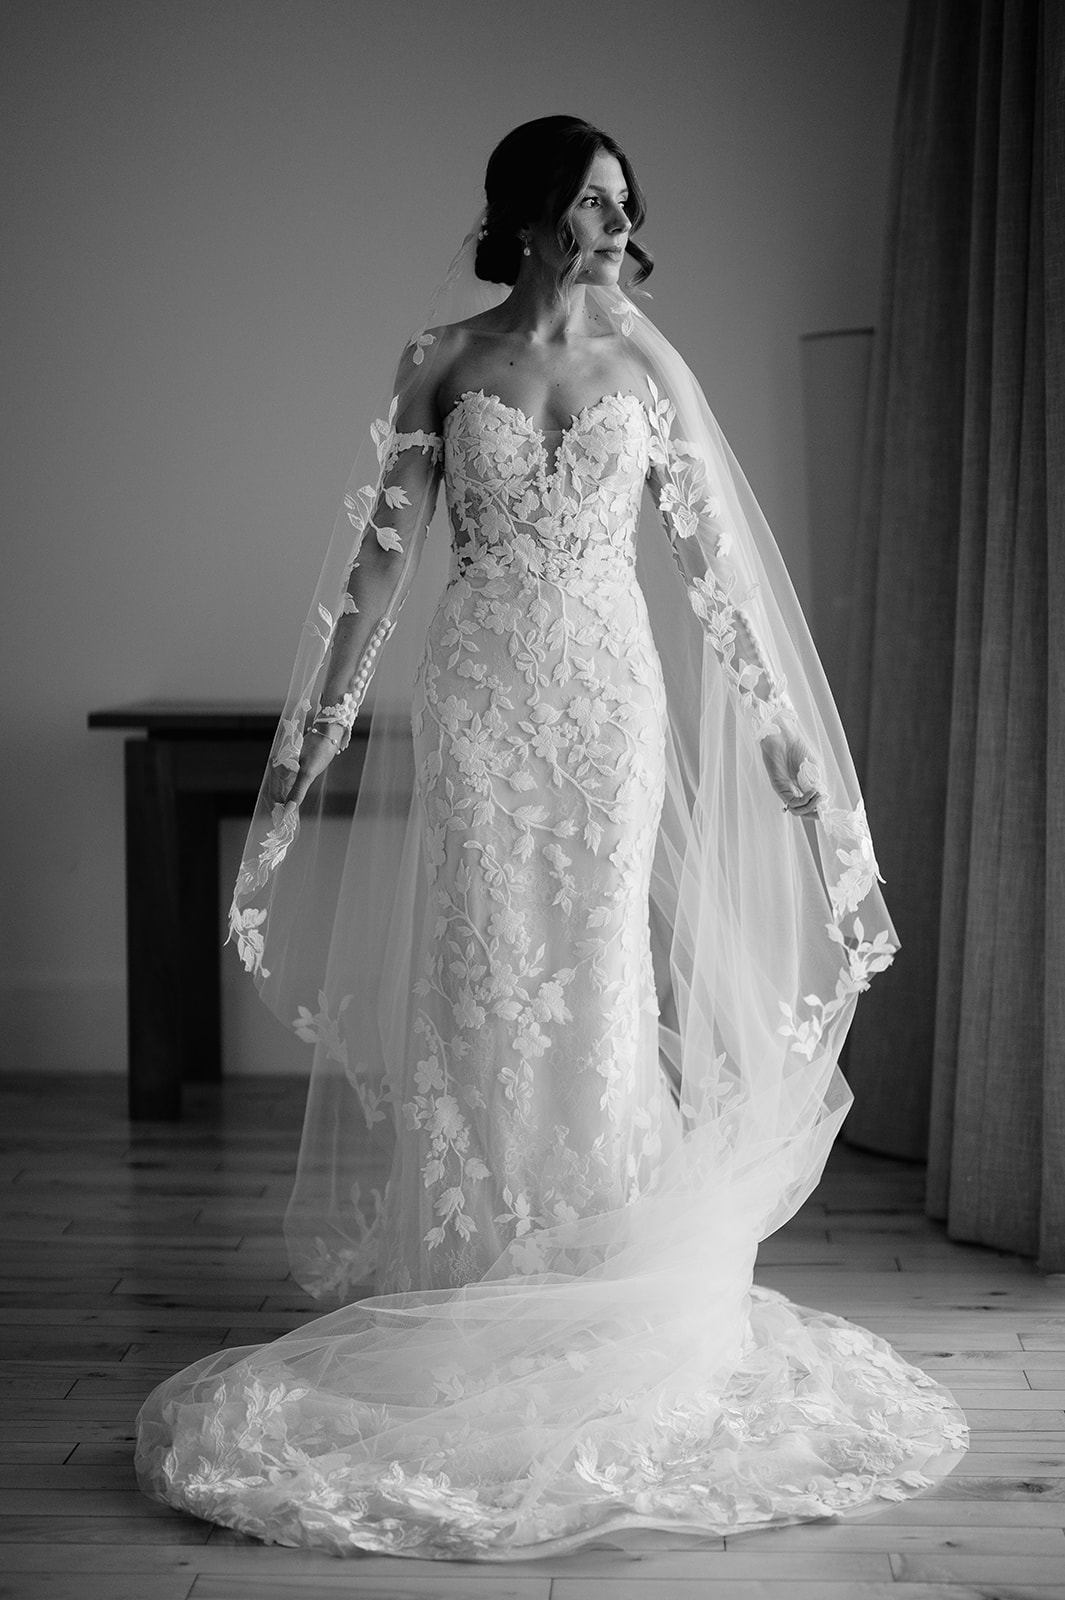 editorial portrait of bride with veil in black and white